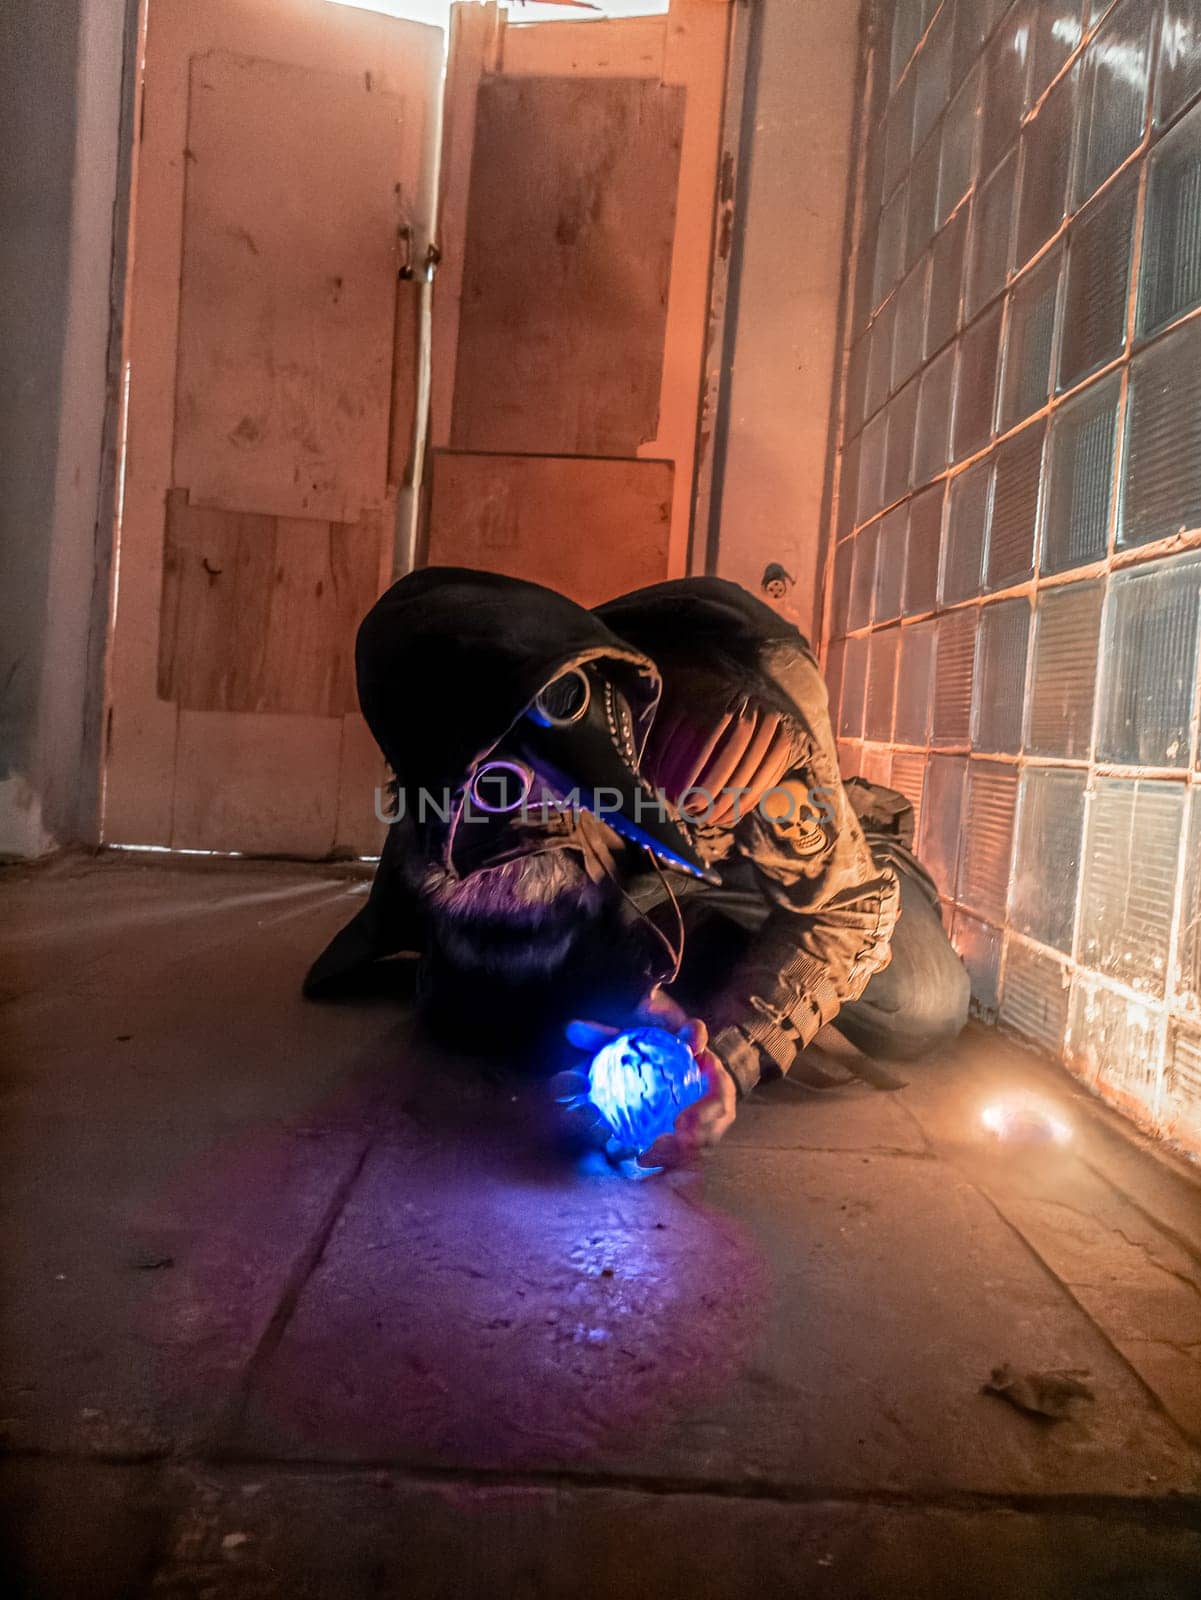 Cosplay of a stalker lying on the floor of an abandoned house in a plague doctor mask and holding a mysterious artifact. art photo